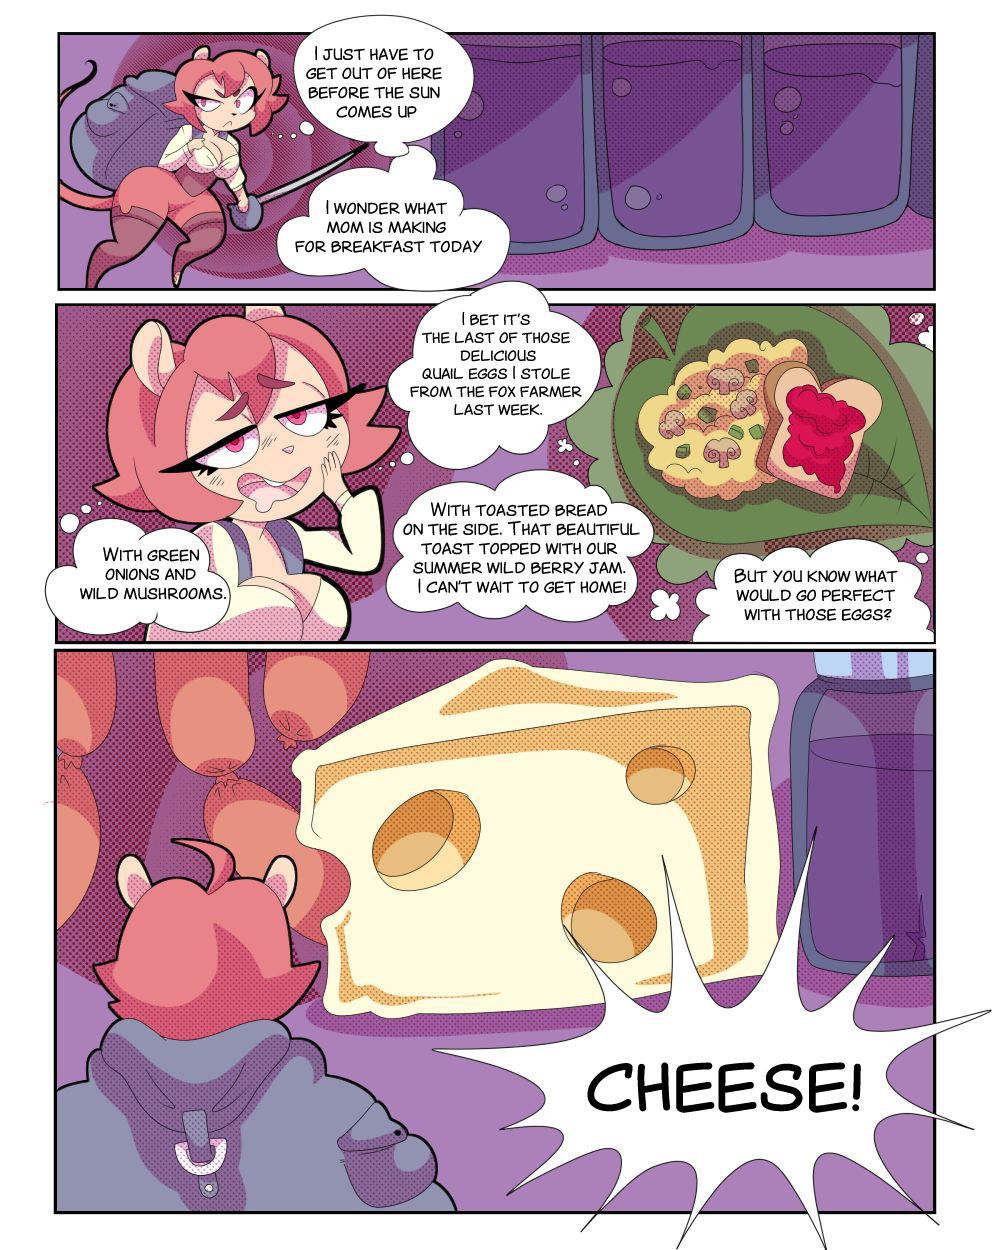 [Diddly-Dongs] - Sophie and Orion - ch1 - The Treacherous Pantry (ong) 2